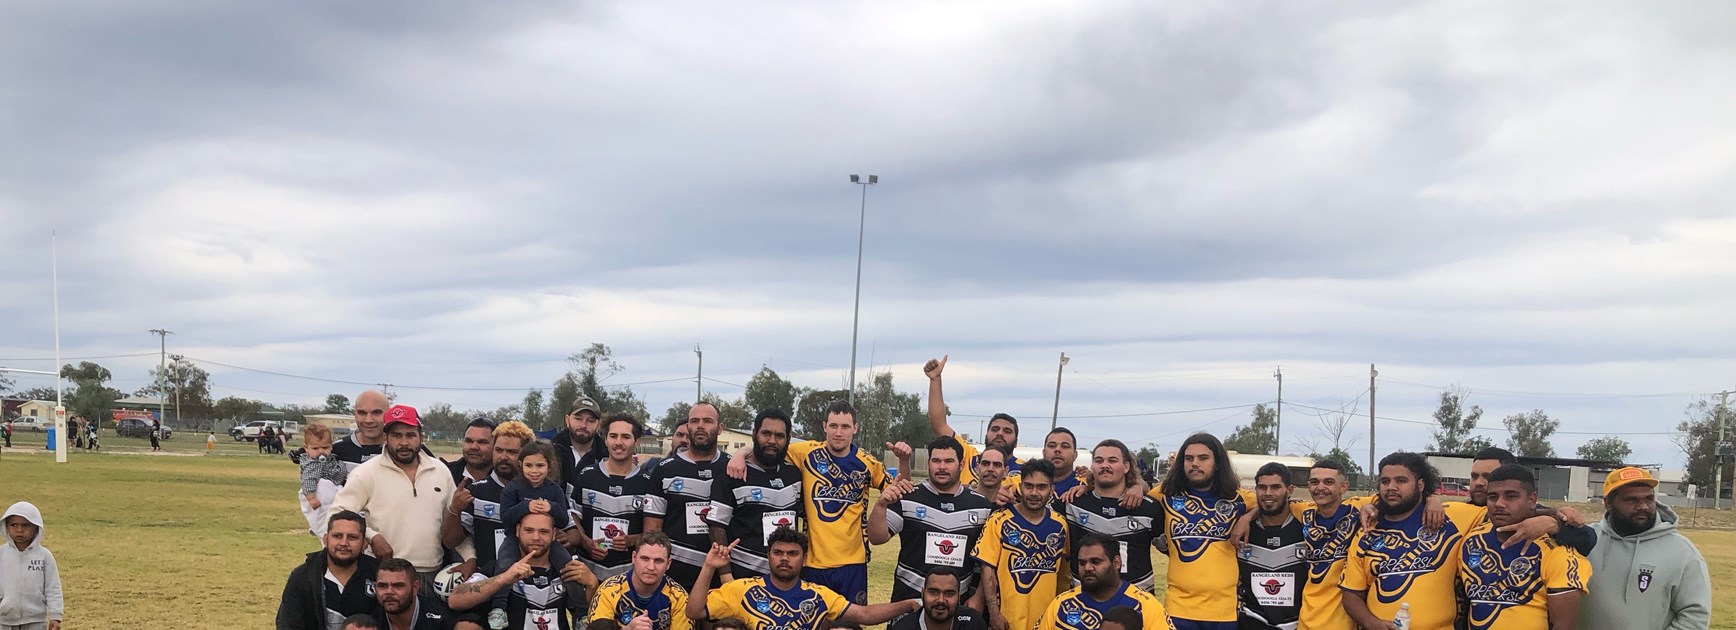 Goodooga Magpies chasing fairy tale premiership in Grand Final